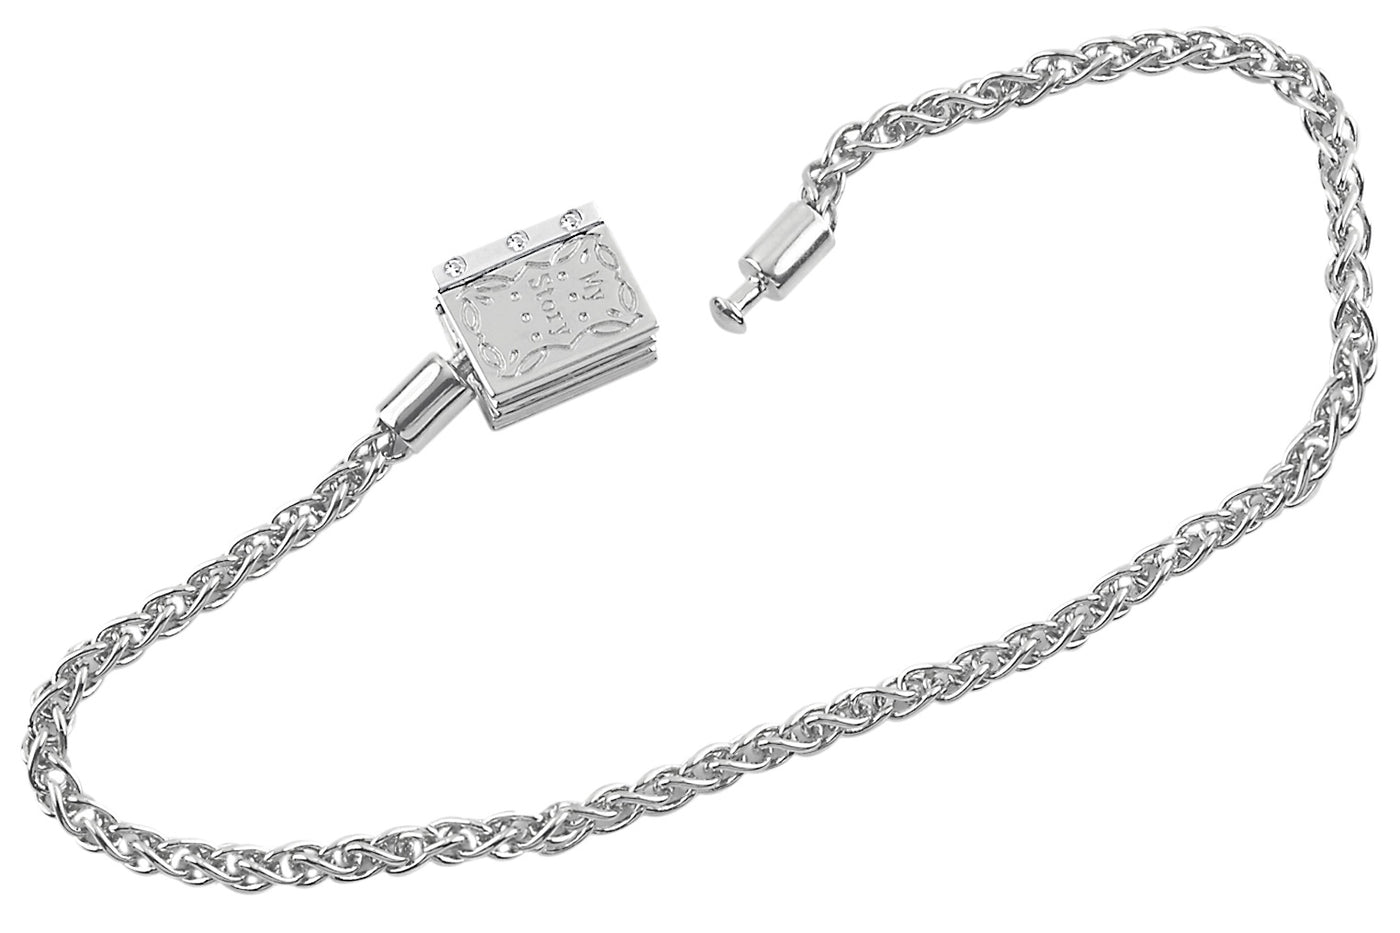 7.25" Bracelet WG - 14K White Gold W/O Stopper Beads and Storywheel Book Clasp with Diamonds